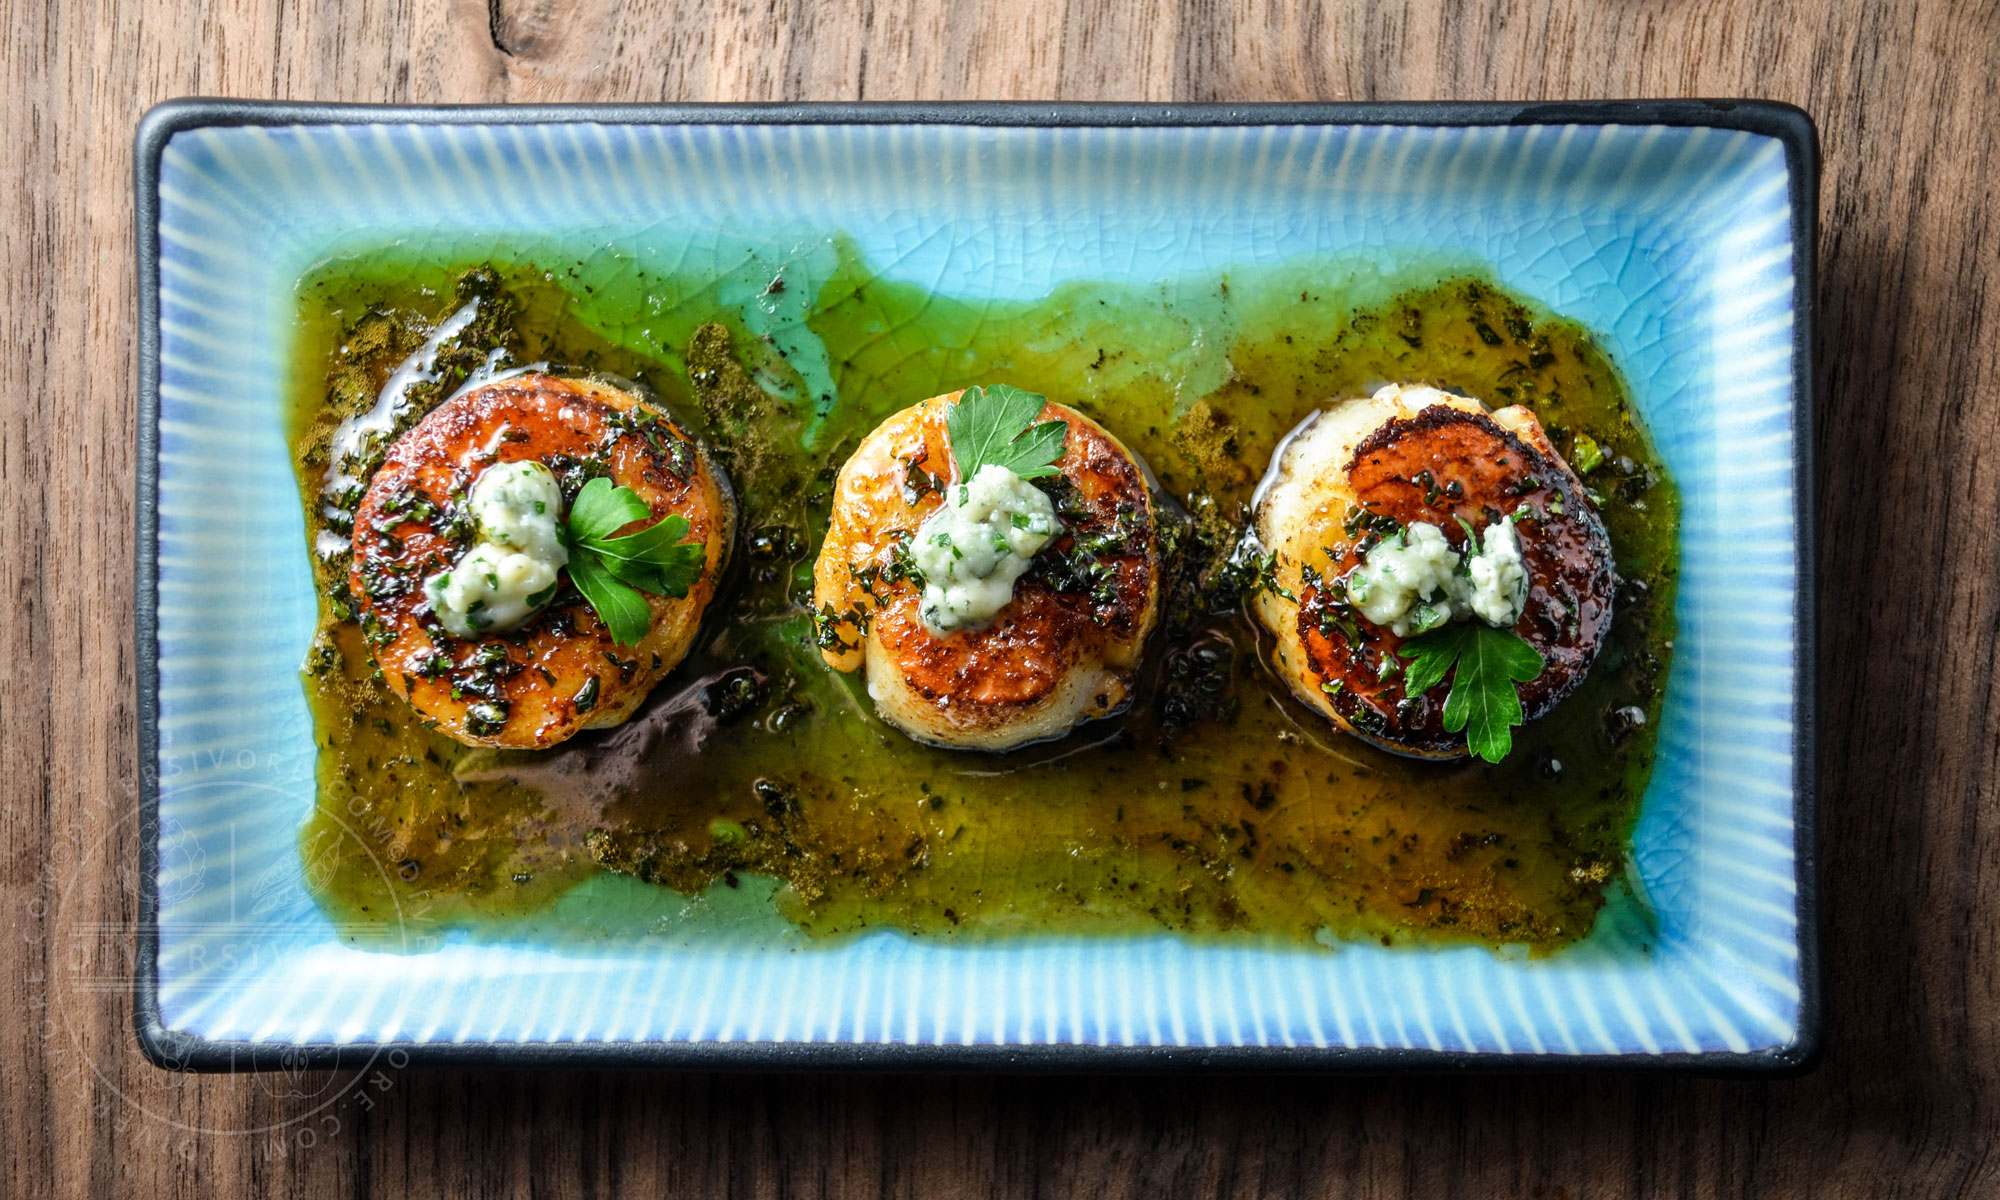 Seared scallops with a honey-parsley gastrique and blue cheese